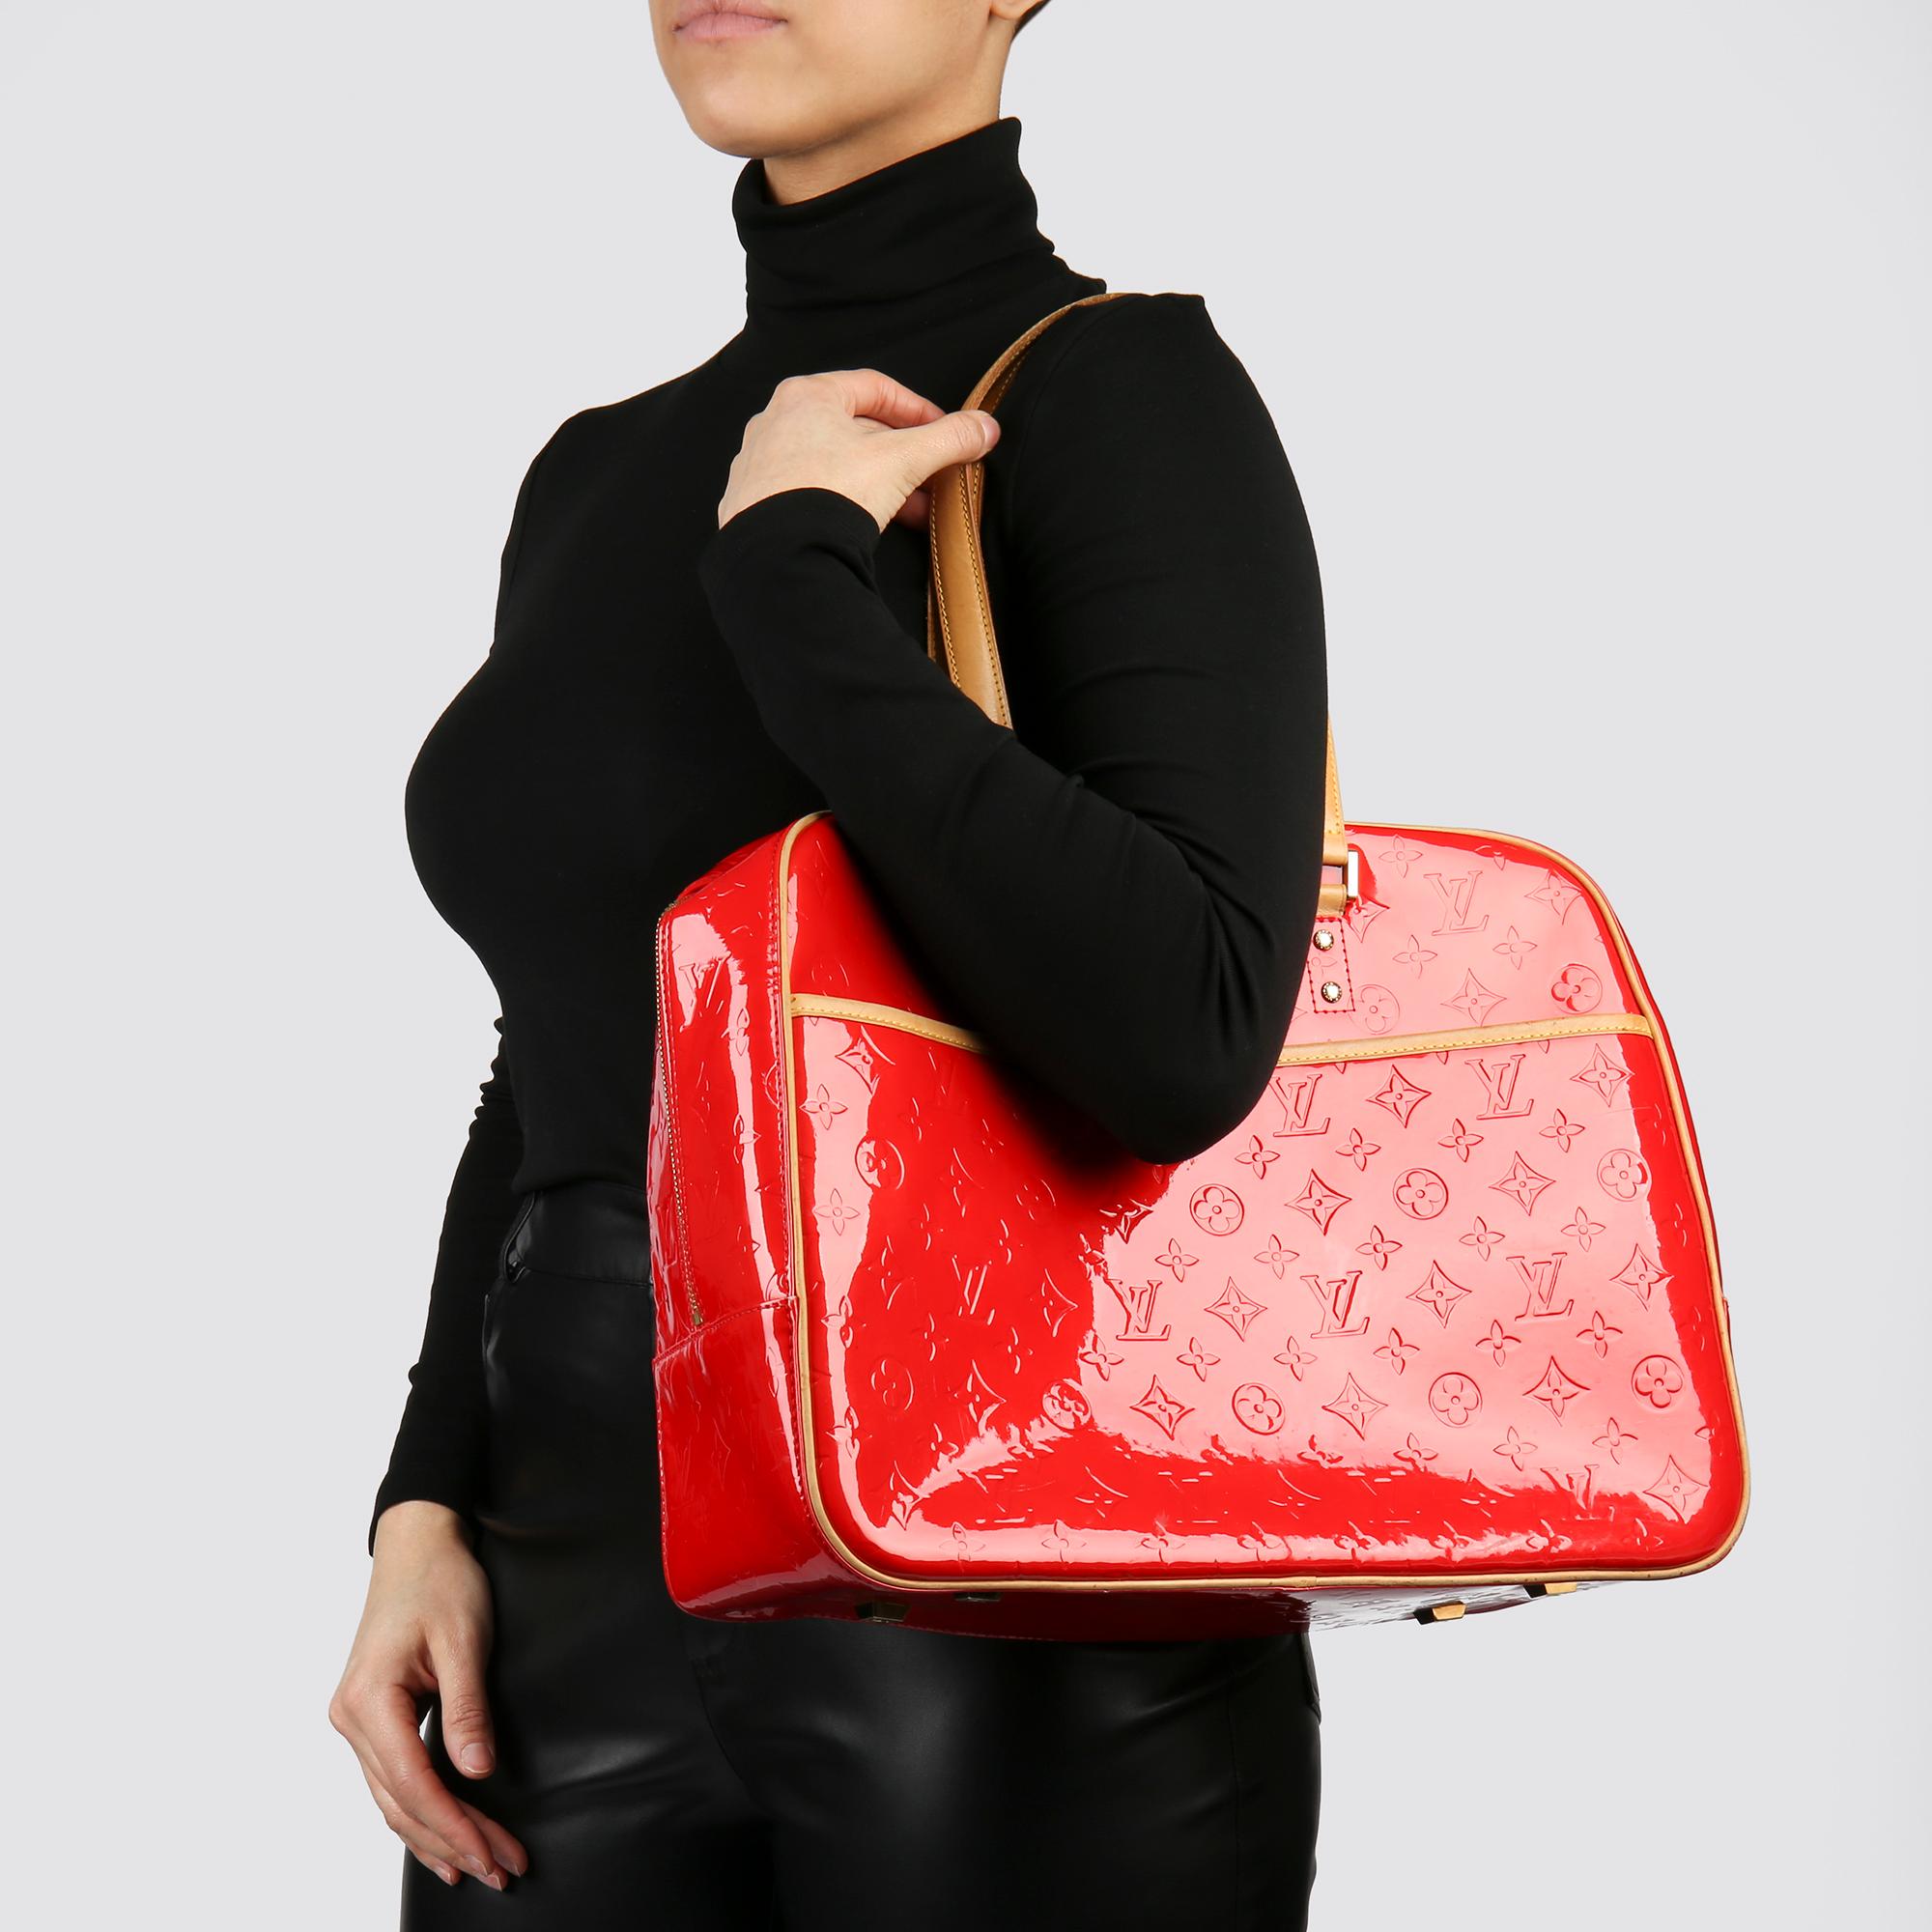 LOUIS VUITTON
Red Monogram Vernis Leather Sutton

Xupes Reference: HB3779
Serial Number: CA0030
Age (Circa): 2000
Accompanied By: Louis Vuitton Dust Bag
Authenticity Details: Date Stamp (Made in Spain) 
Gender: Ladies
Type: Tote, Shoulder

Colour: